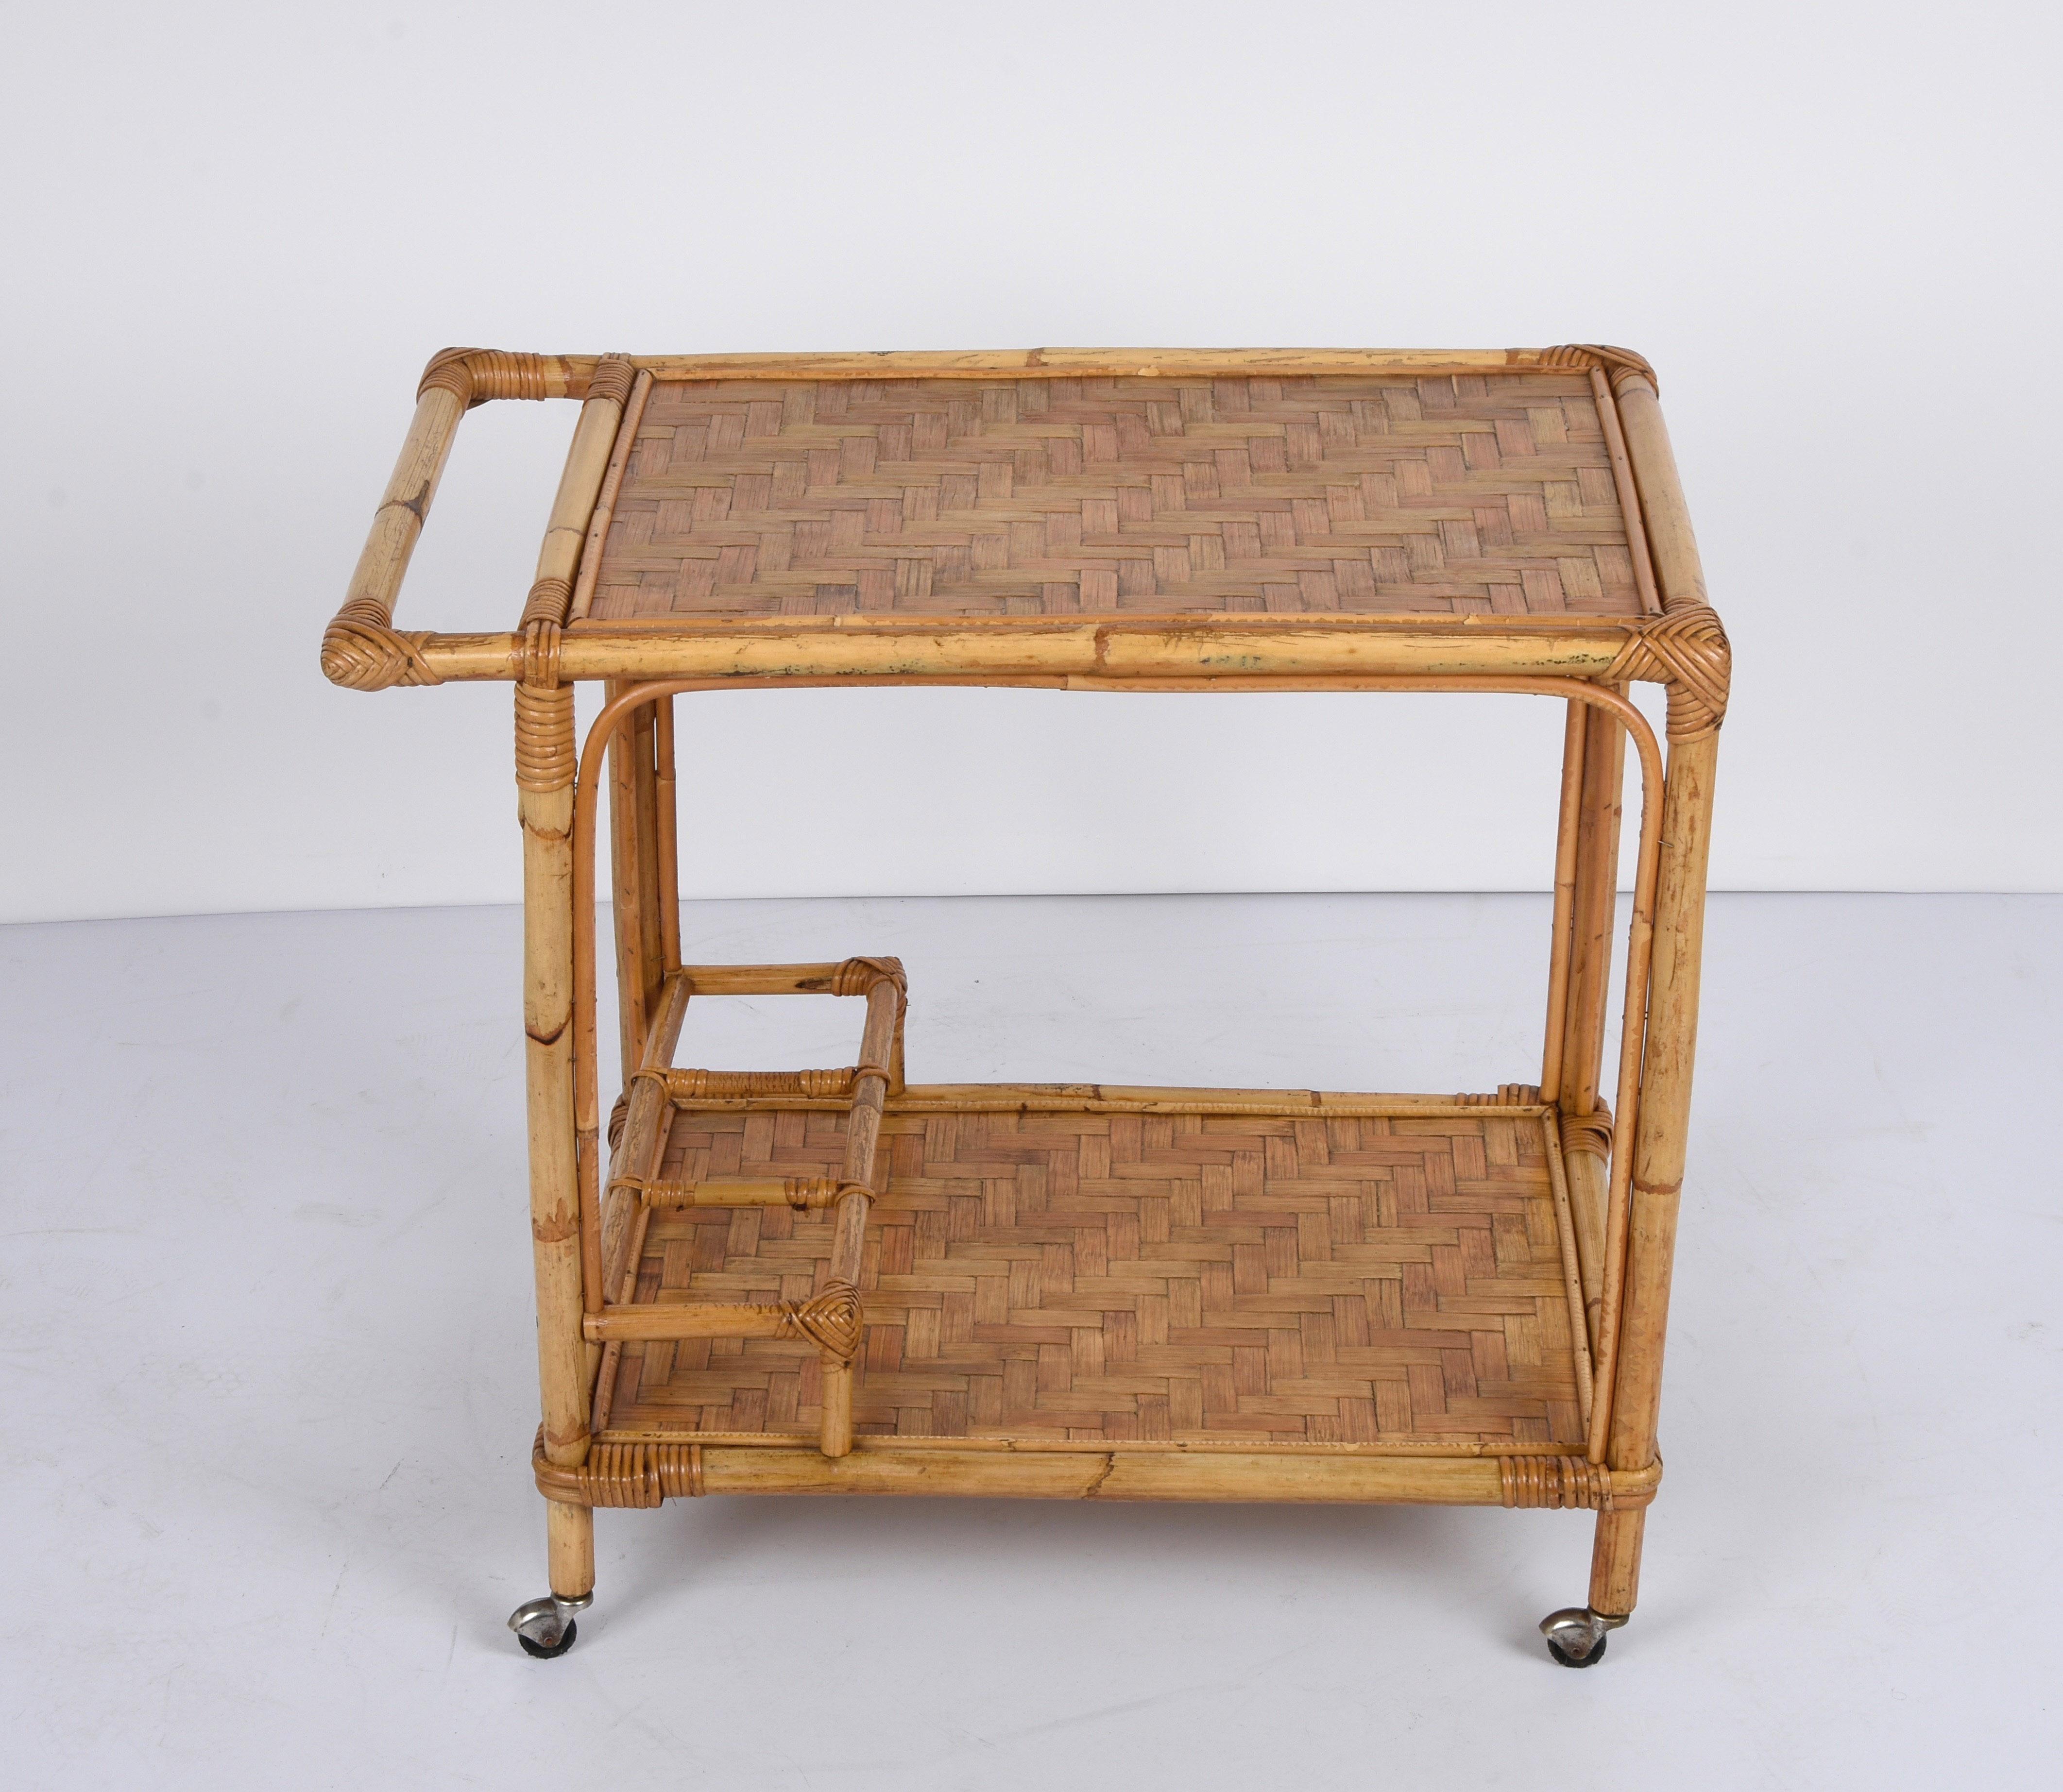 Midcentury Bamboo and Rattan Italian Rectangular Serving Bar Cart Trolley, 1960s For Sale 2